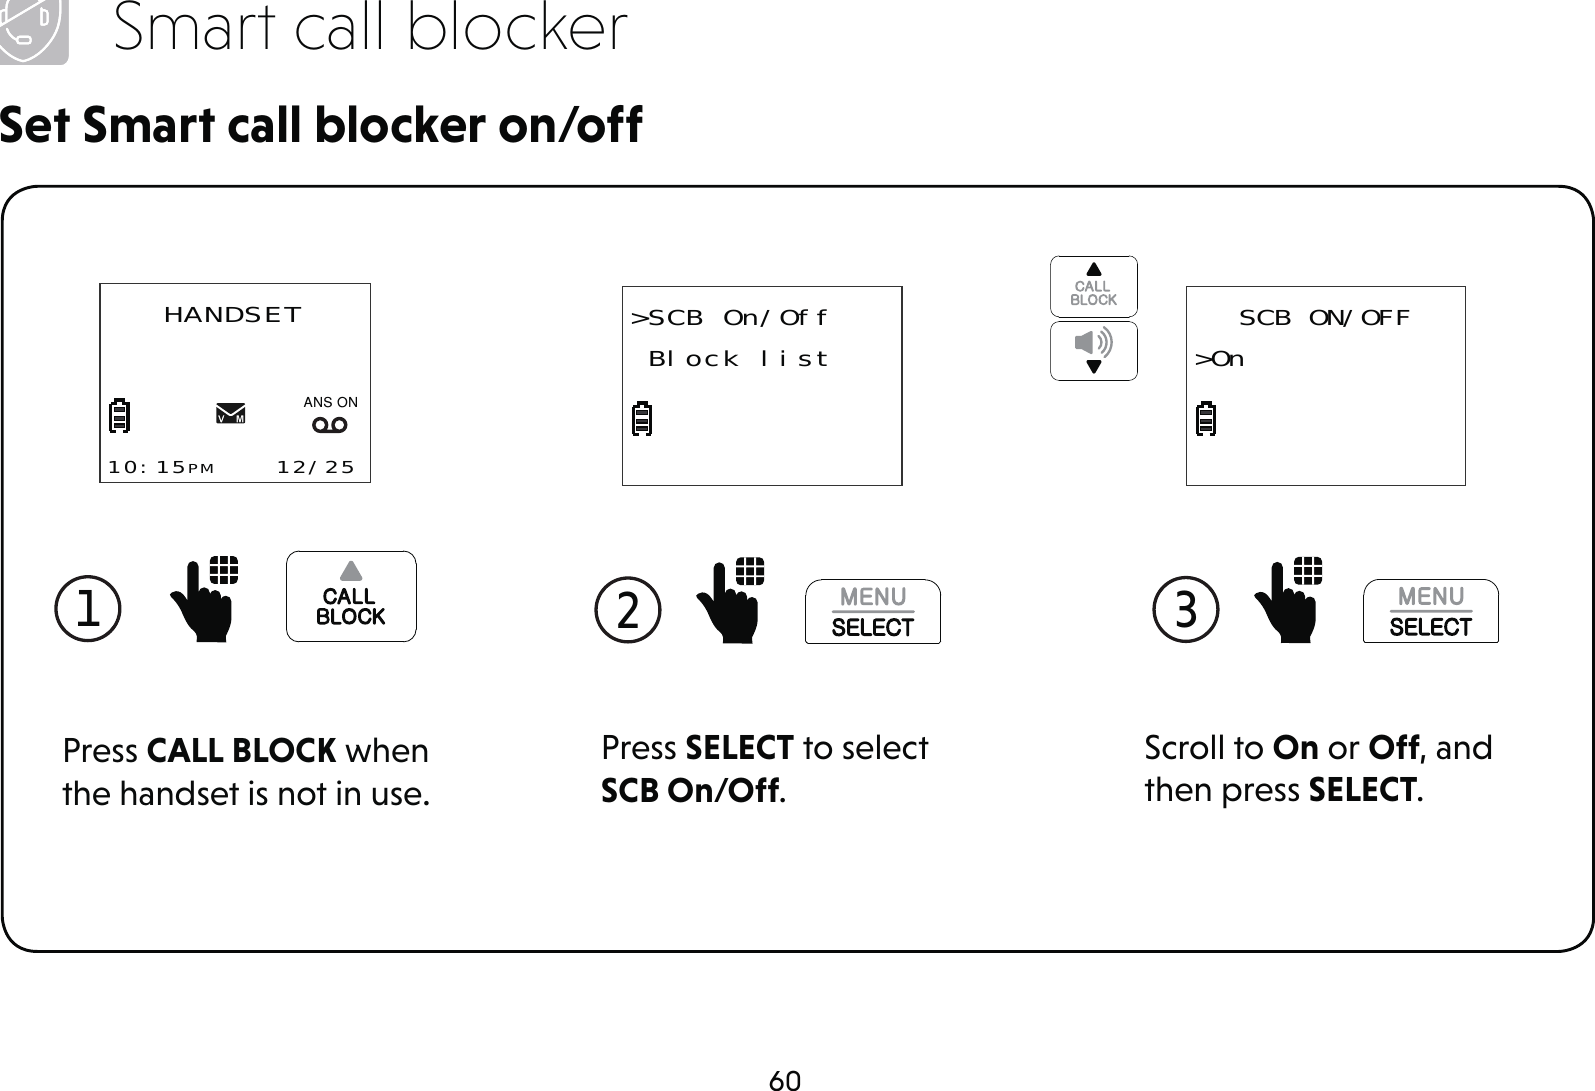 60Smart call blockerSet Smart call blocker on/offPress SELECT to select SCB On/Off.2 &gt;SCB On/Off Block list1 Press CALL BLOCK when the handset is not in use.HANDSET10:15PM    12/25$1621Scroll to On or Off, and then press SELECT.3 SCB ON/OFF&gt;On